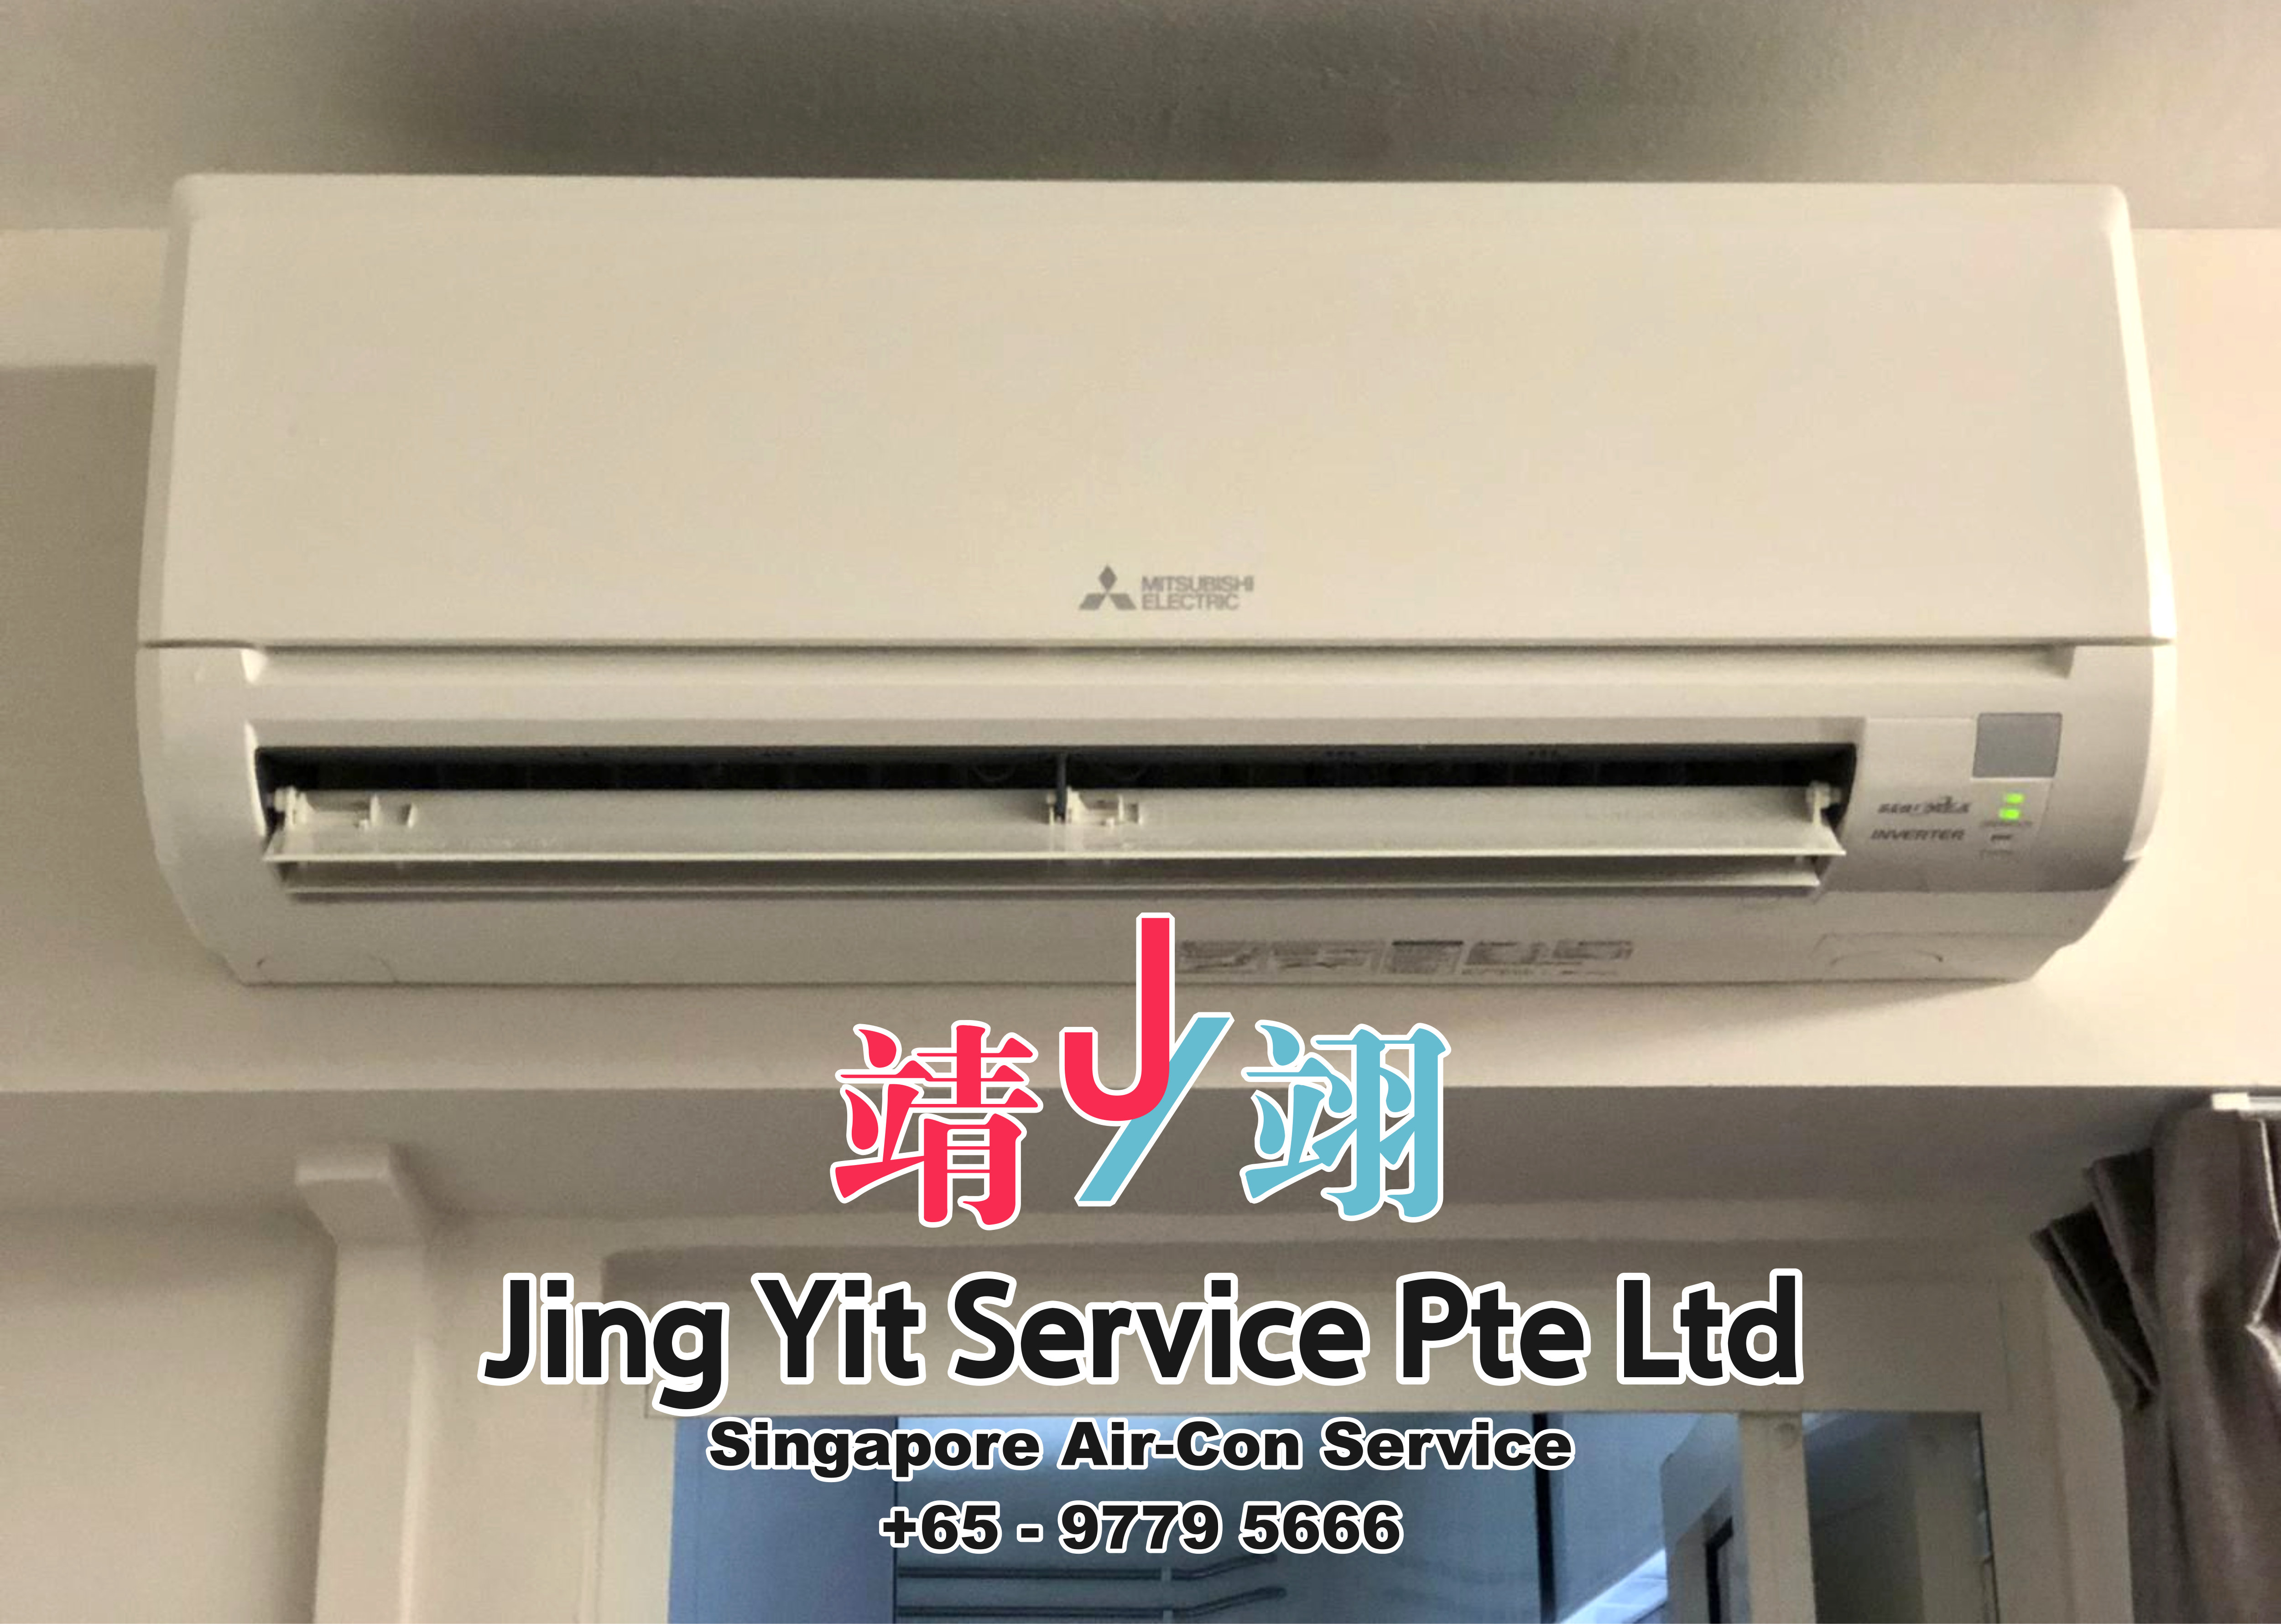 Singapore AirCon Service Air Conditioning Cleaning Repairing and Installation Air-con Gas Refill Aircon Chemical Wash Singapore Jing Yit Service Pte Ltd A02-17